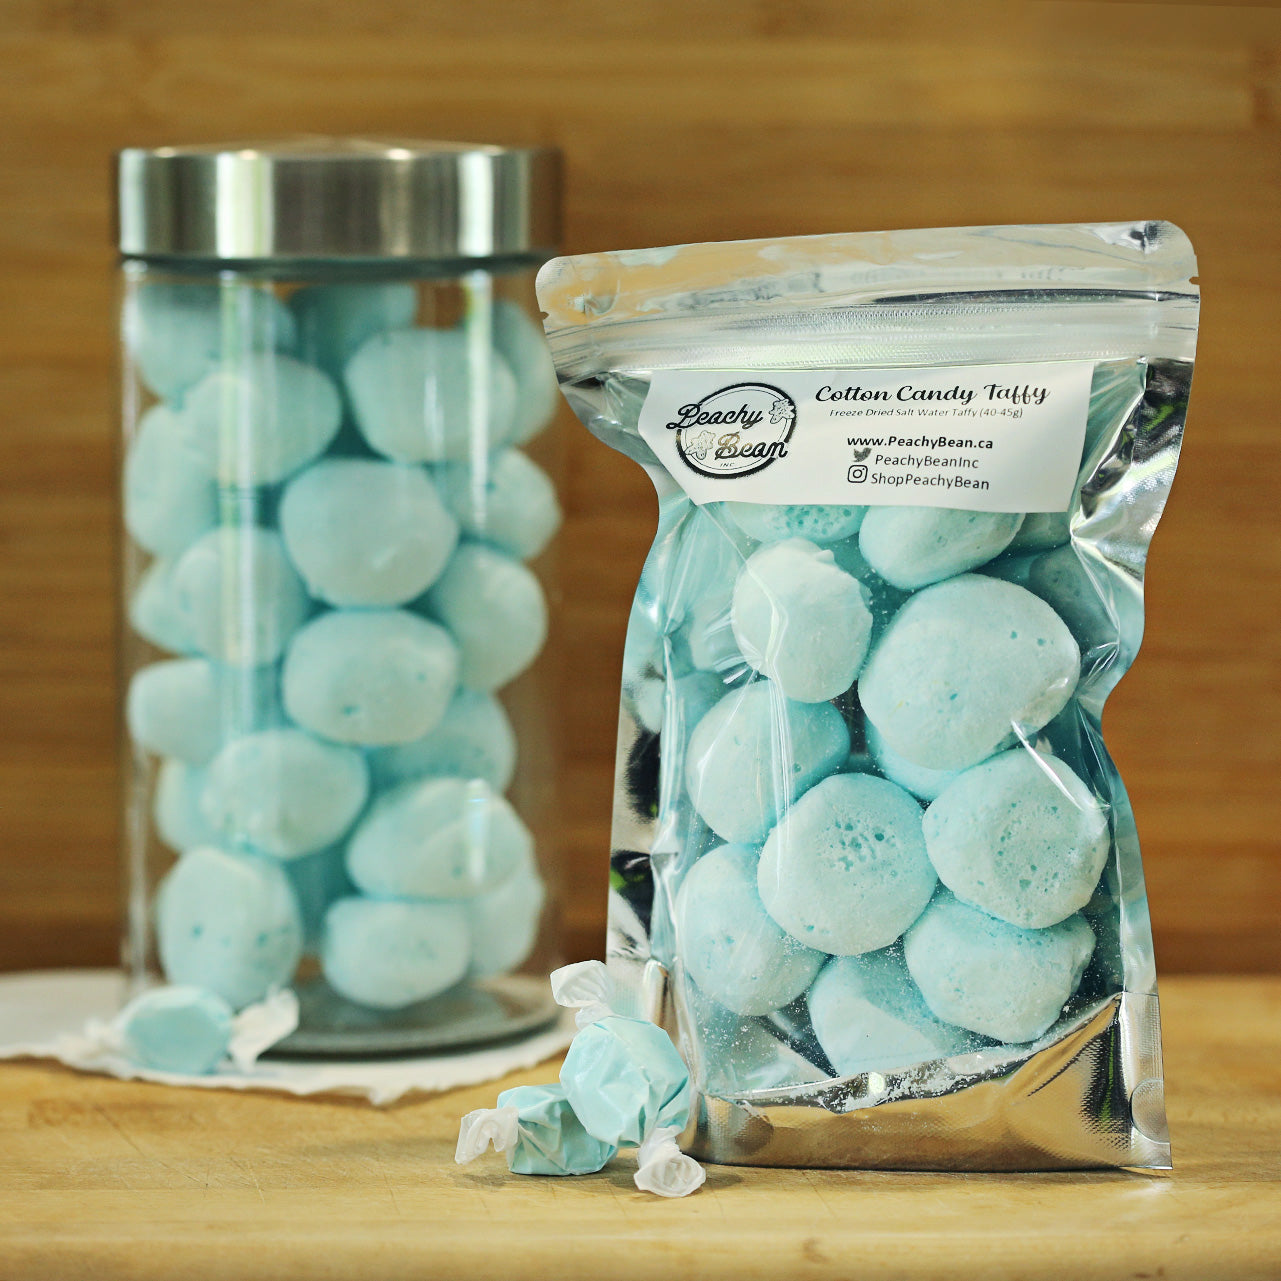 freeze dried candy - freeze dried salt water taffy - cotton candy flavor